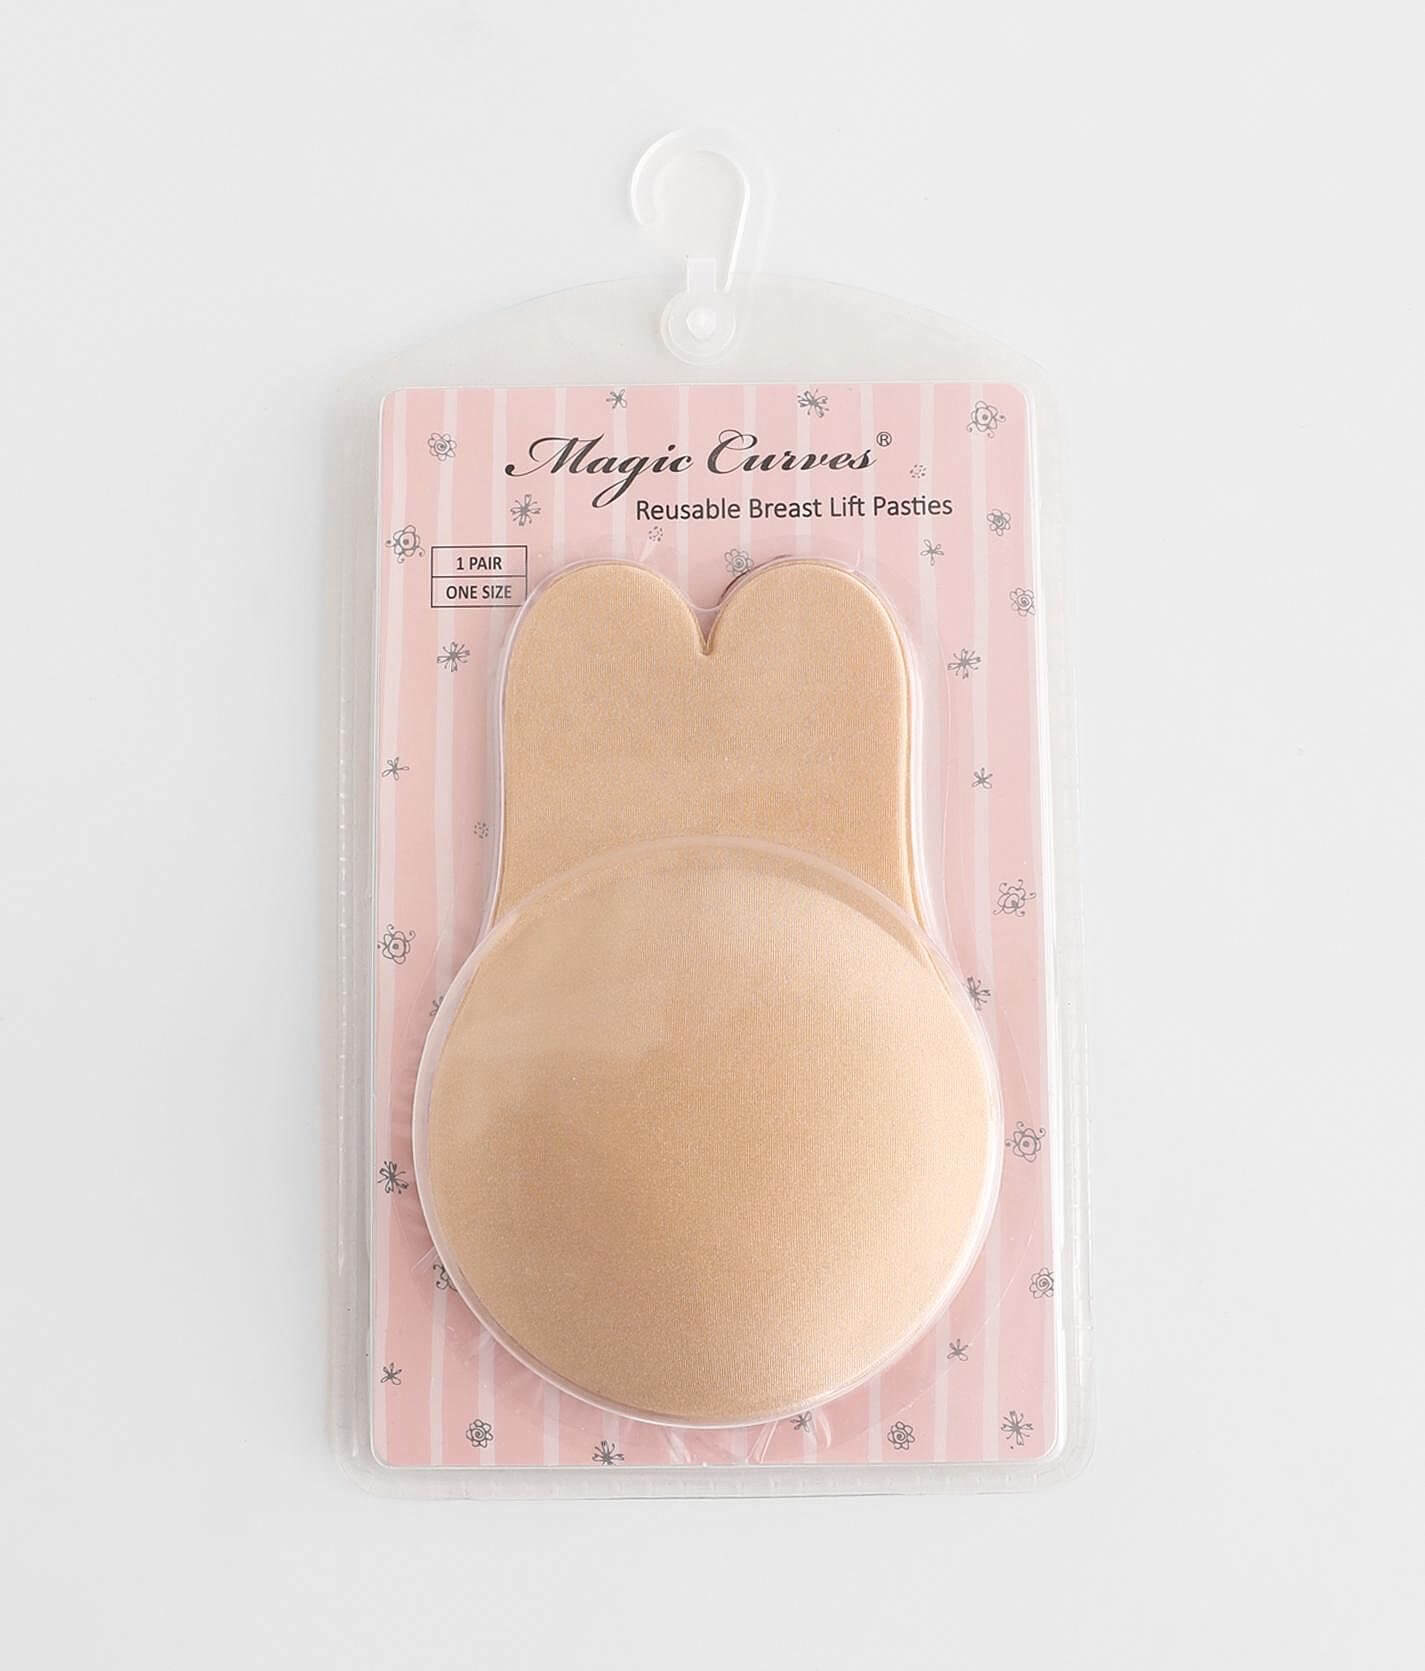 Magic Curves® Reusable Breast Lift Pasties - Women's Intimates in Nude